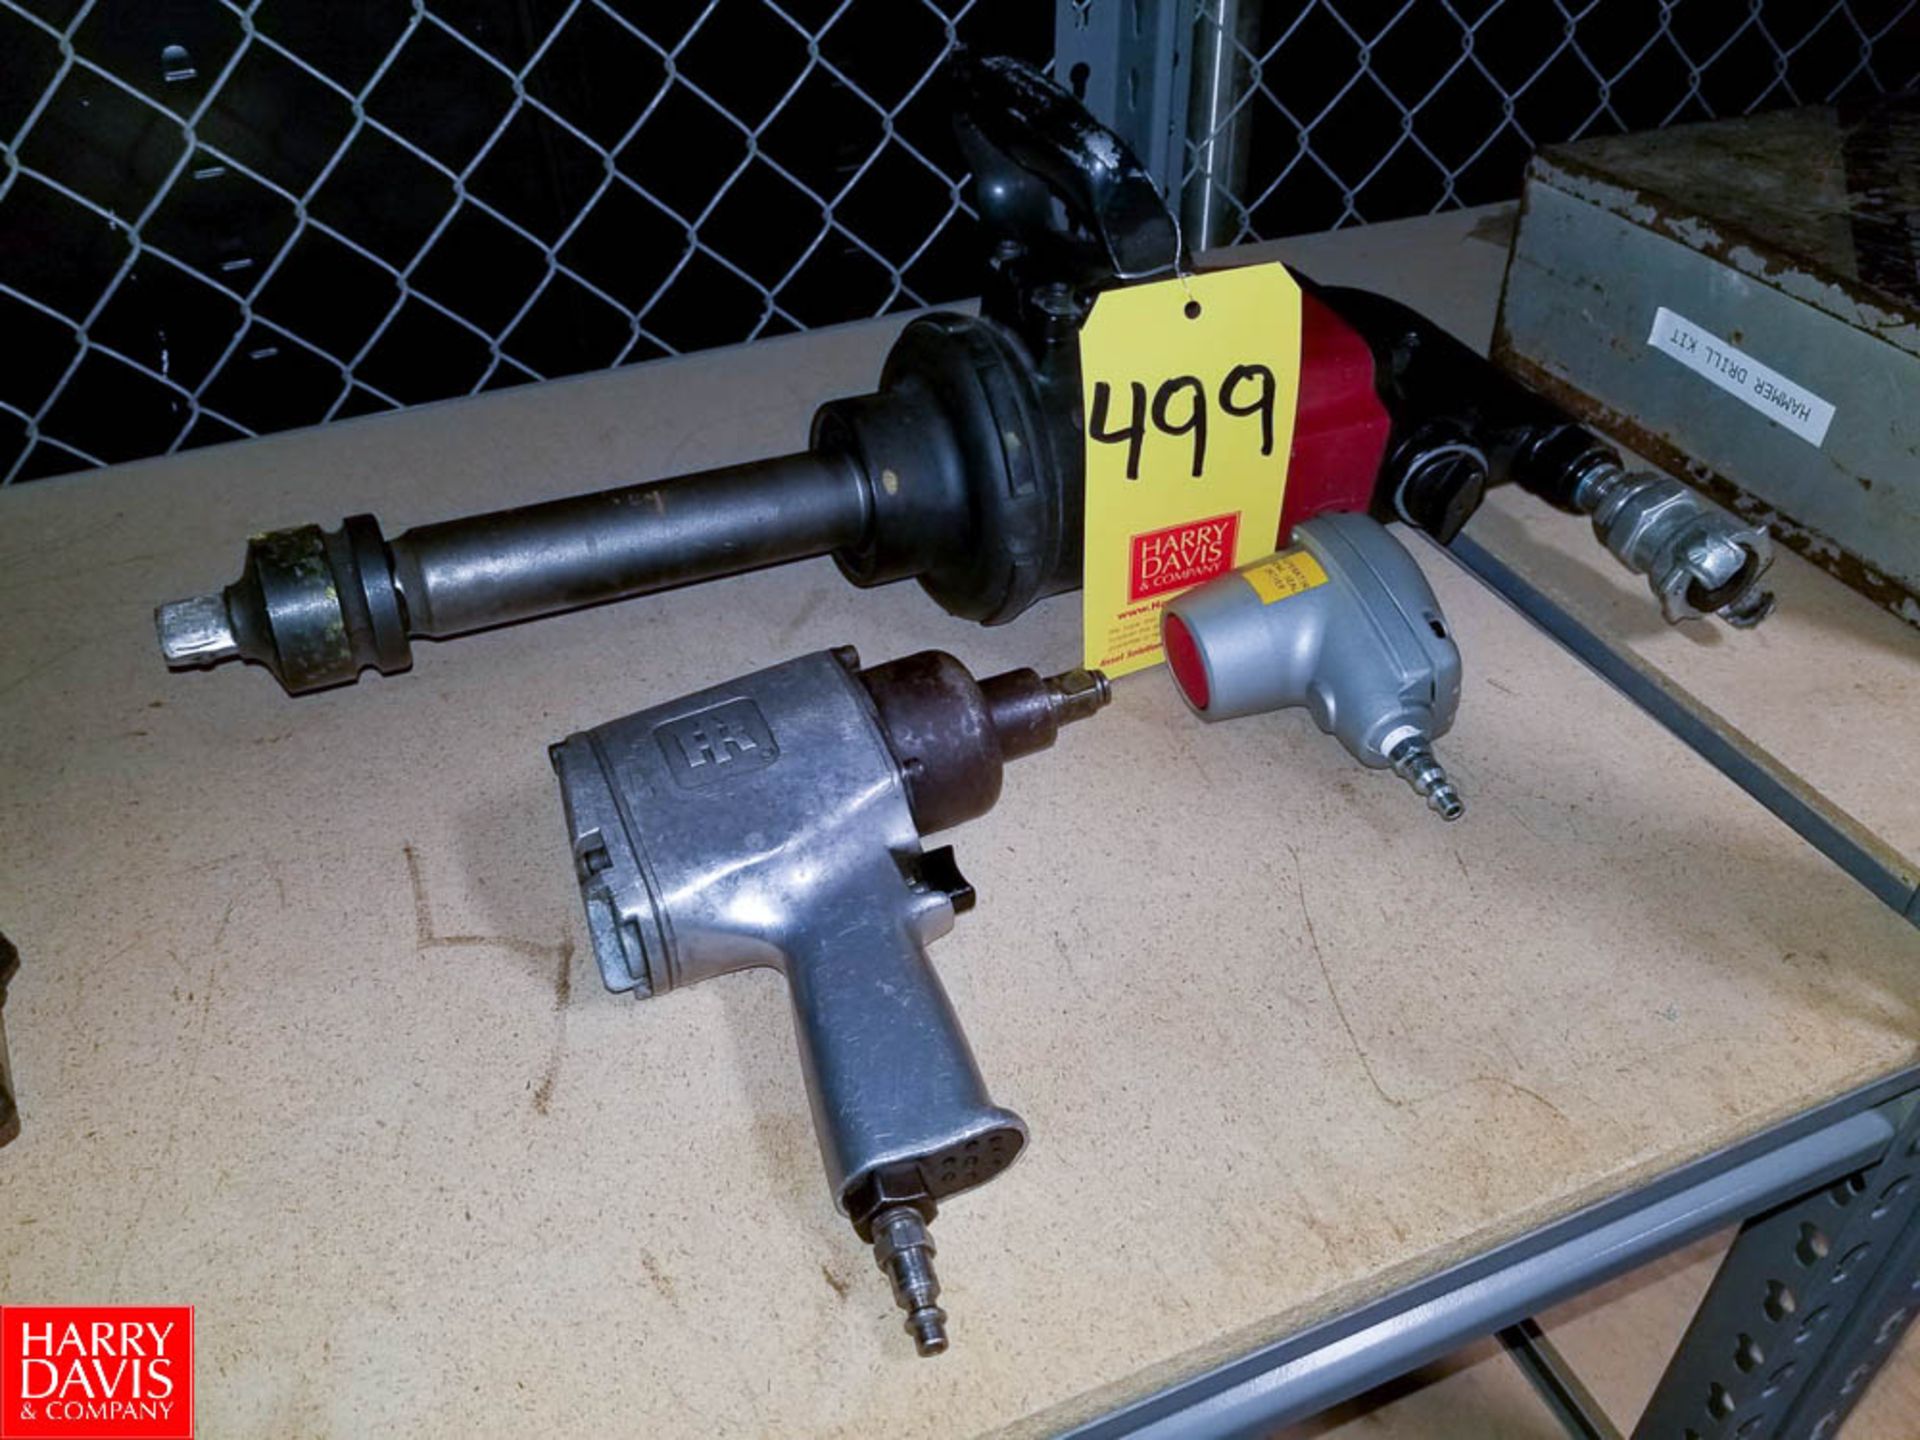 Pneumatic Tools Including (1) Chicago Pneumatic Model CP7782-6 3/4" Impact Wrench (1) Ingersoll-Rand